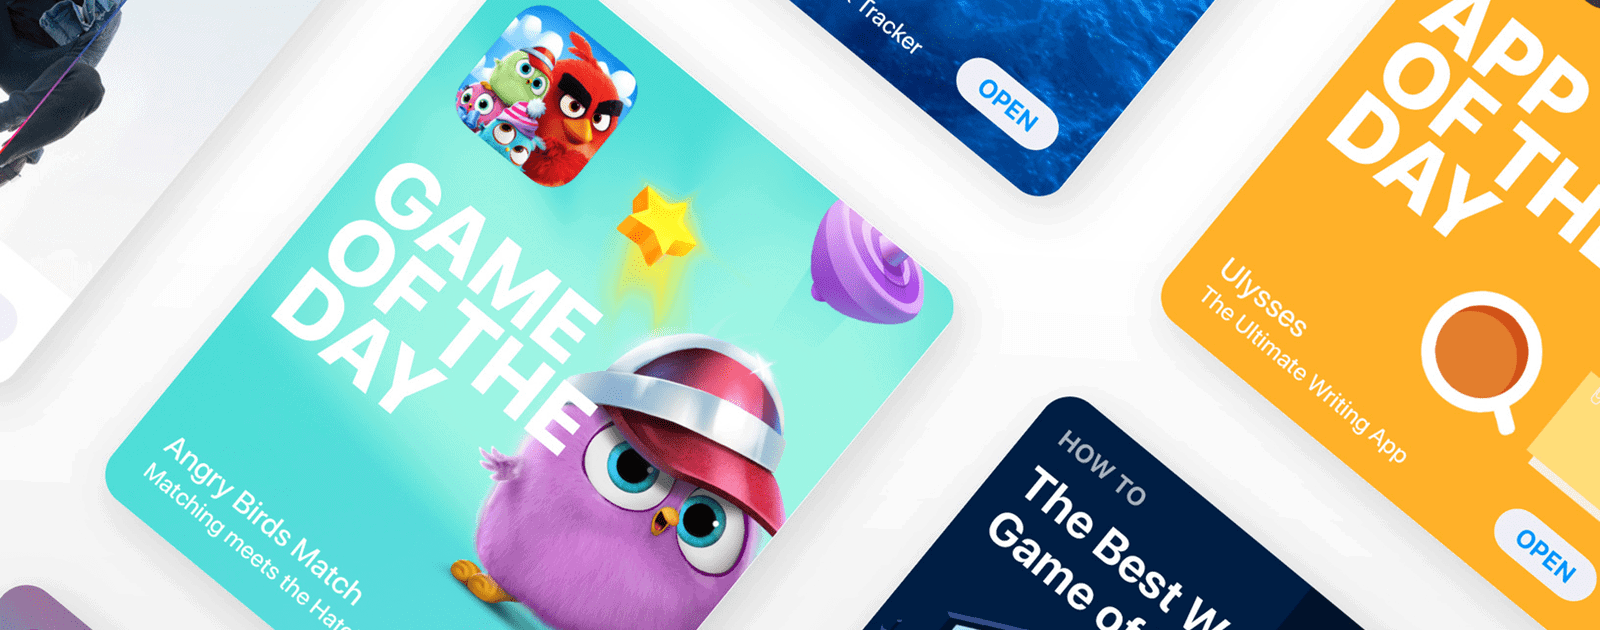 App Store 2017 Sales Set New Year’s Day Record of $300 Million